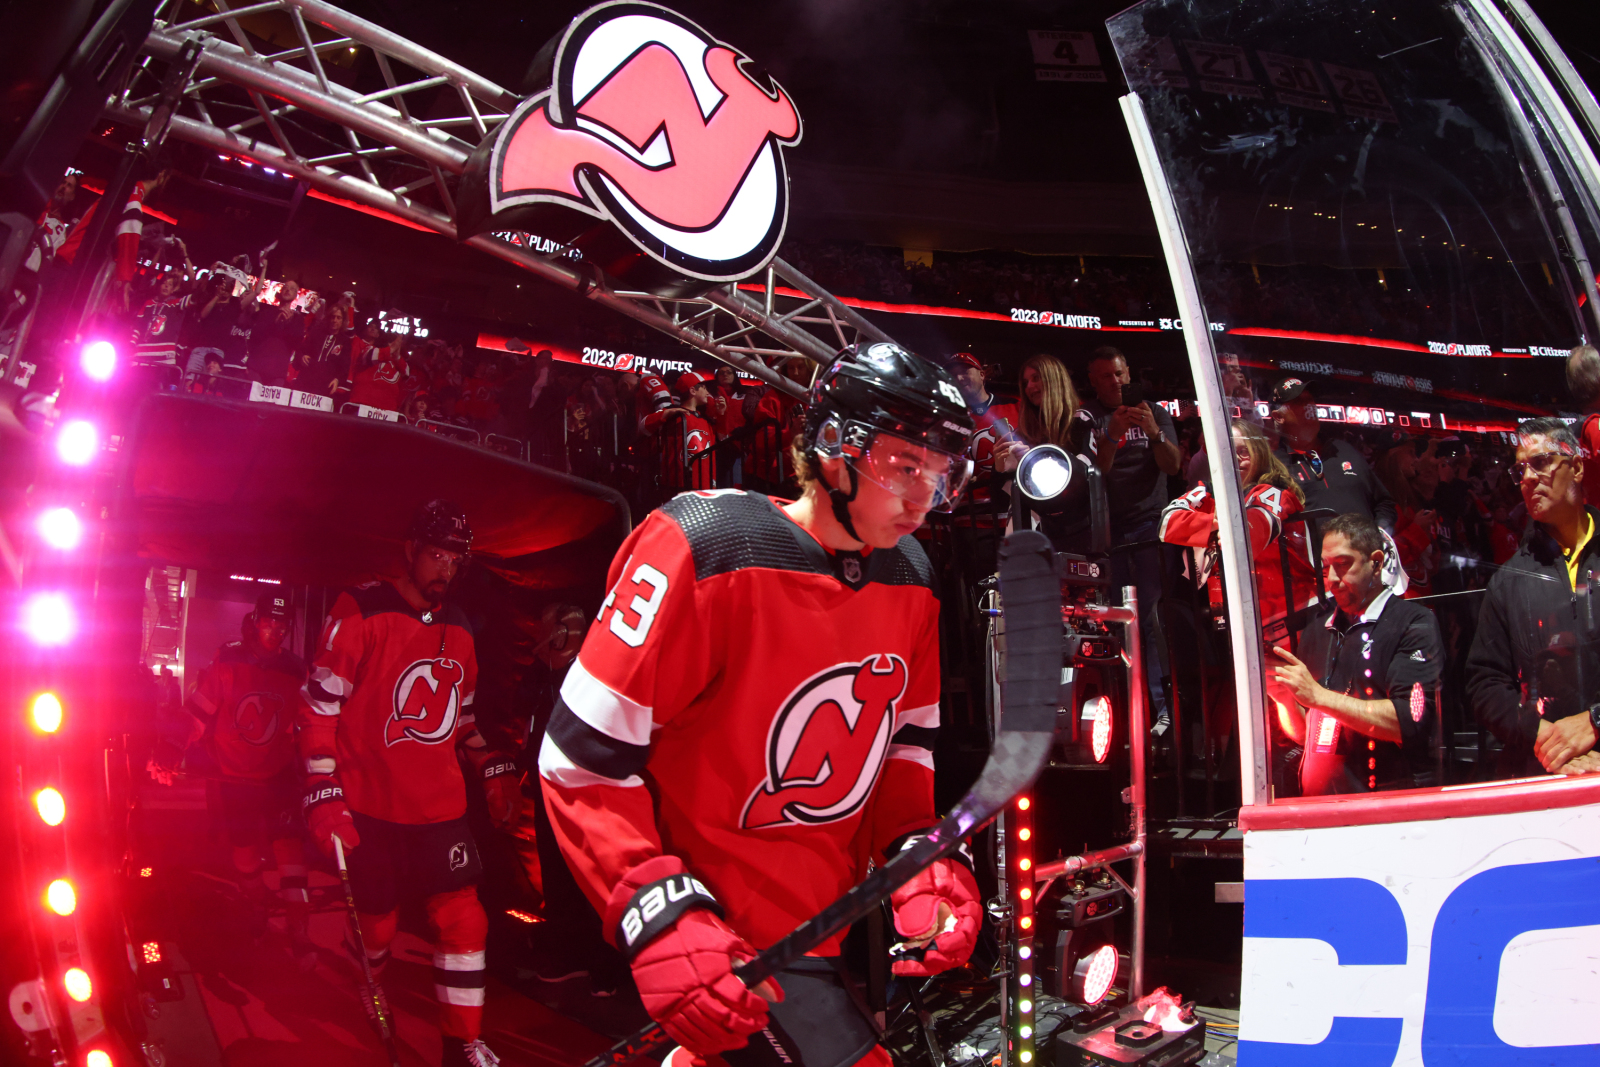 100+] New Jersey Devils Wallpapers